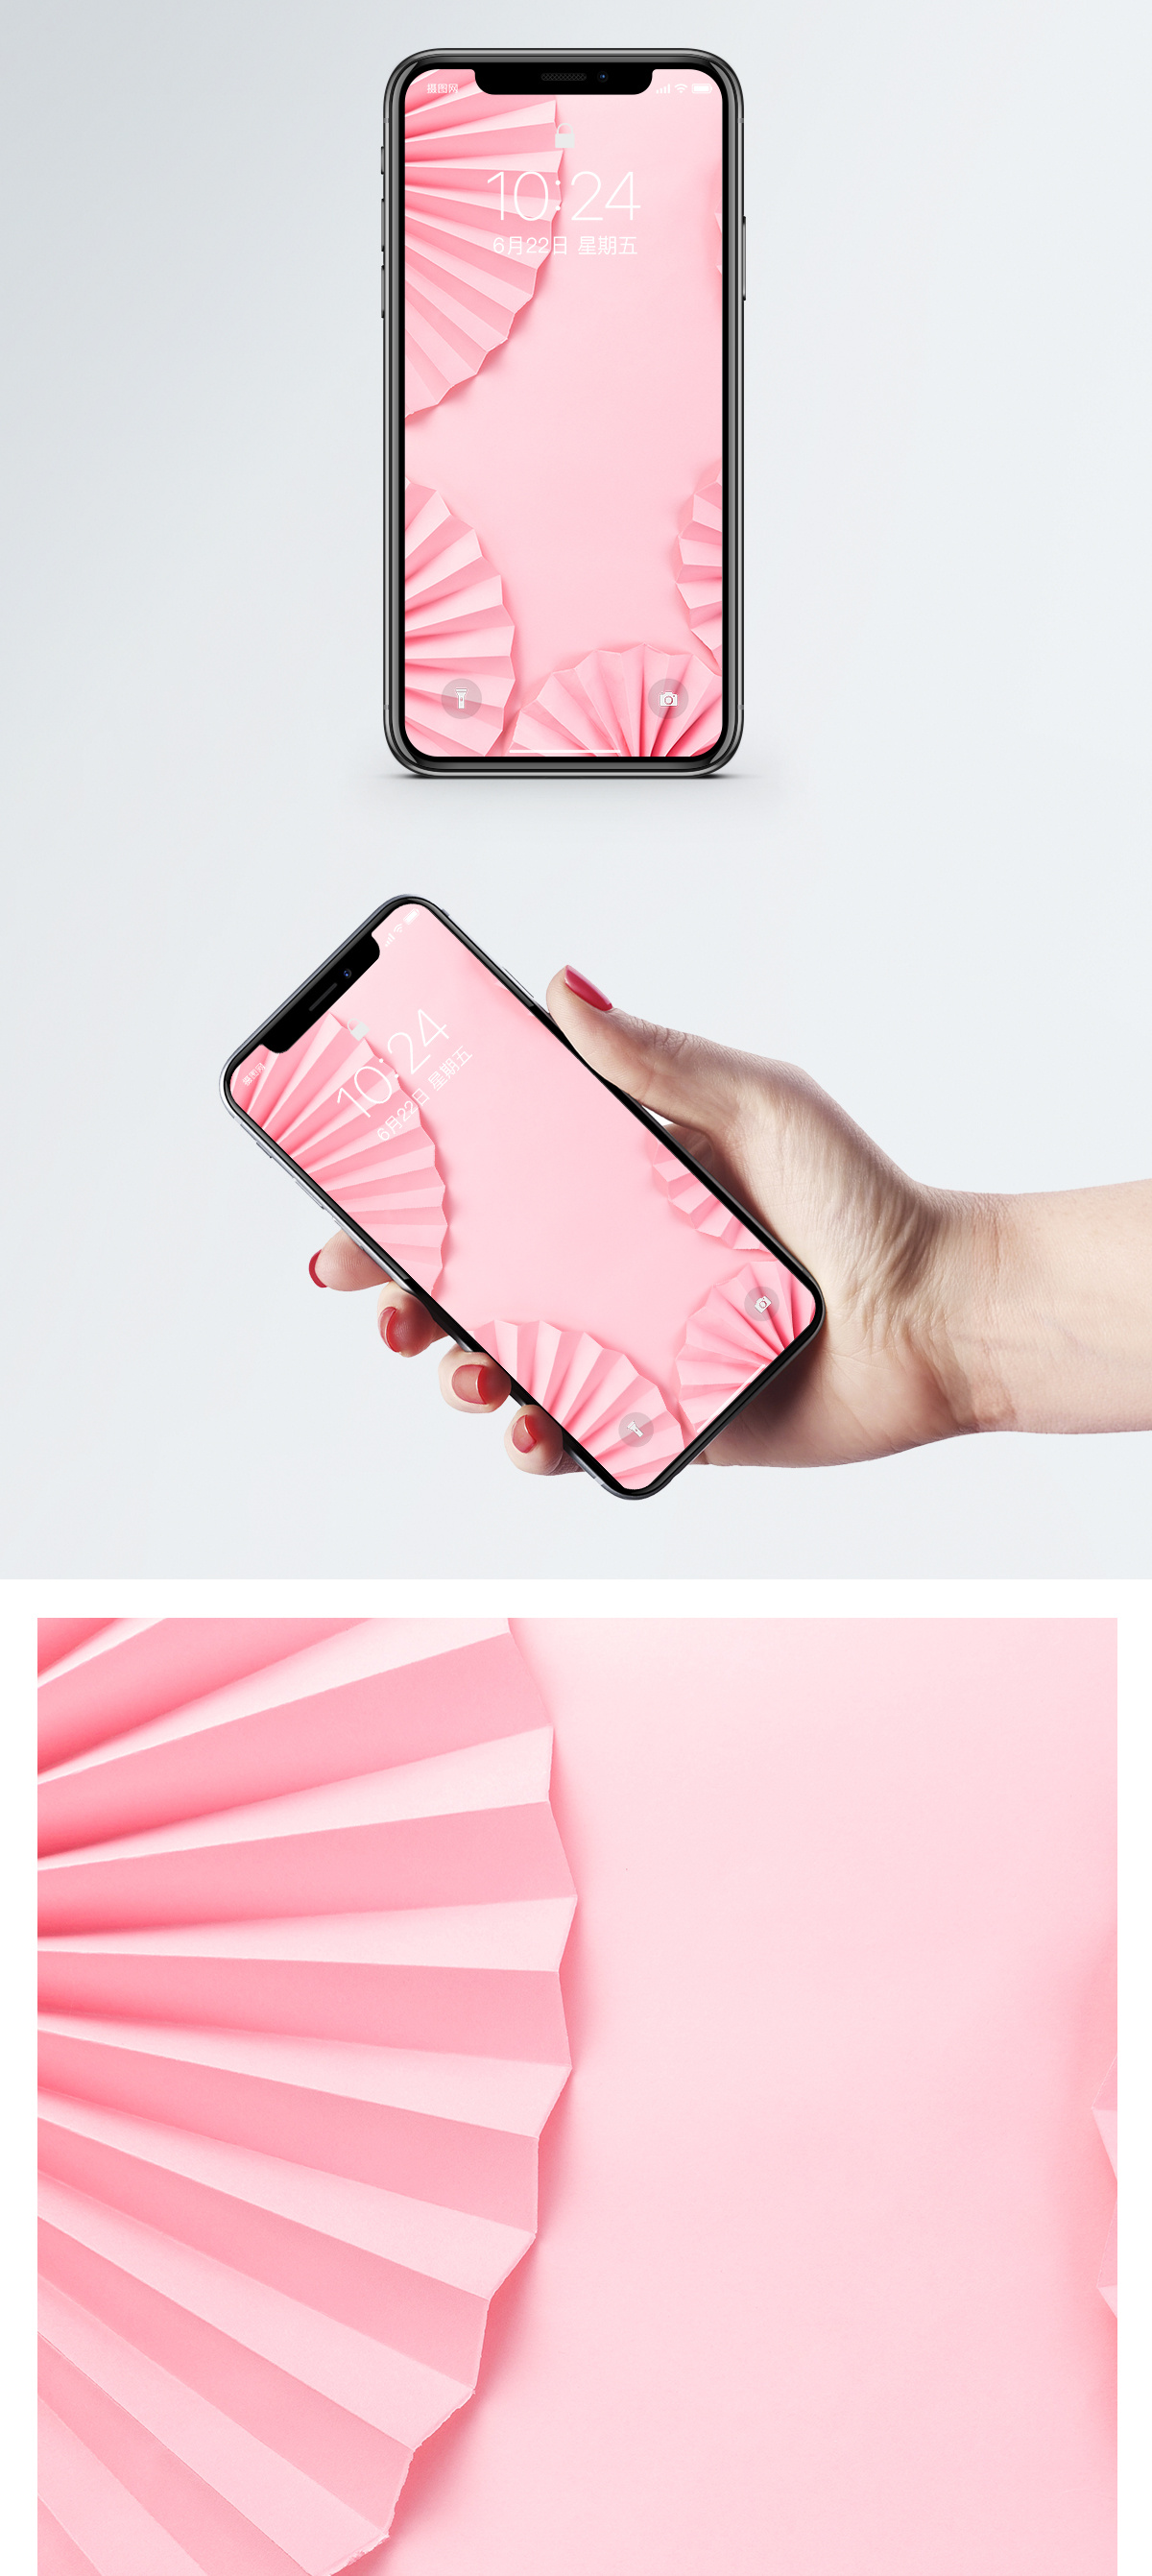 Pure Pink Mobile Phone Wallpaper Backgrounds Images Free Download 400288220 Lovepik Com